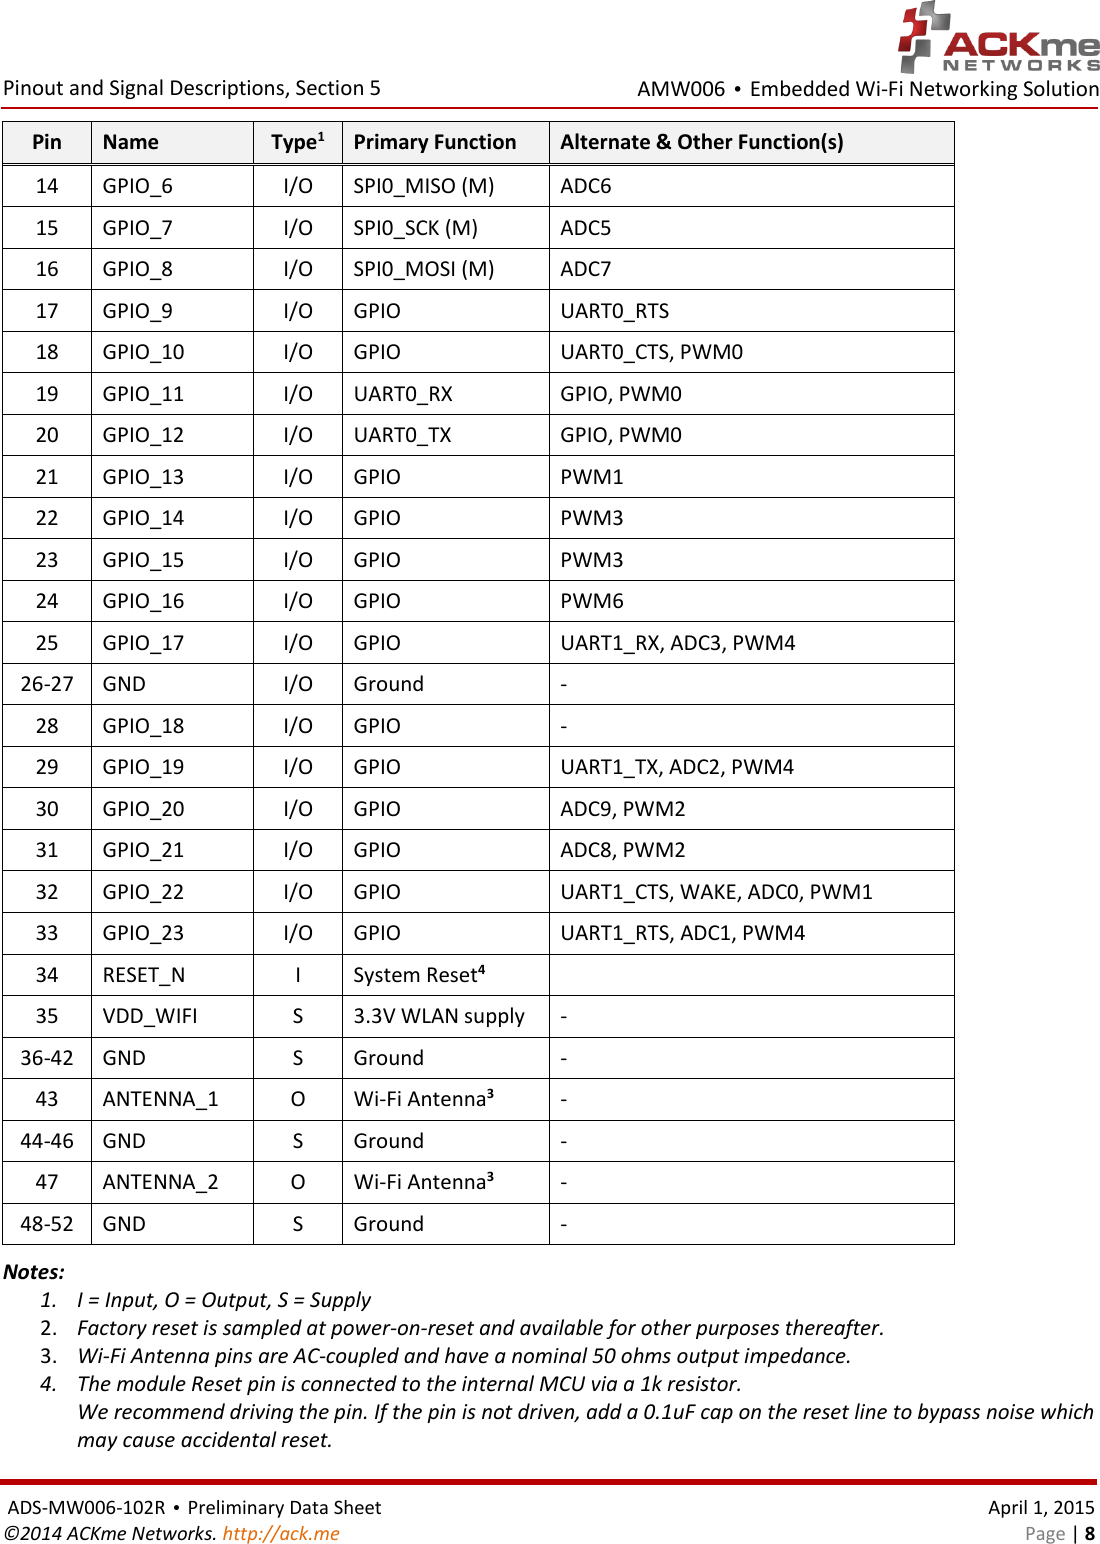 AMW006 • Embedded Wi-Fi Networking Solution  Pinout and Signal Descriptions, Section 5  ADS-MW006-102R • Preliminary Data Sheet    April 1, 2015 ©2014 ACKme Networks. http://ack.me    Page | 8 Pin Name Type1 Primary Function  Alternate &amp; Other Function(s) 14 GPIO_6 I/O SPI0_MISO (M) ADC6 15 GPIO_7 I/O SPI0_SCK (M) ADC5 16 GPIO_8 I/O SPI0_MOSI (M) ADC7 17 GPIO_9 I/O GPIO UART0_RTS 18 GPIO_10 I/O GPIO UART0_CTS, PWM0 19 GPIO_11 I/O UART0_RX GPIO, PWM0 20 GPIO_12 I/O UART0_TX GPIO, PWM0 21 GPIO_13 I/O GPIO PWM1 22 GPIO_14 I/O GPIO PWM3 23 GPIO_15 I/O GPIO PWM3 24 GPIO_16 I/O GPIO PWM6 25 GPIO_17 I/O GPIO UART1_RX, ADC3, PWM4 26-27 GND I/O Ground - 28 GPIO_18 I/O GPIO - 29 GPIO_19 I/O GPIO UART1_TX, ADC2, PWM4 30 GPIO_20 I/O GPIO ADC9, PWM2 31 GPIO_21 I/O GPIO ADC8, PWM2 32 GPIO_22 I/O GPIO UART1_CTS, WAKE, ADC0, PWM1 33 GPIO_23 I/O GPIO UART1_RTS, ADC1, PWM4 34 RESET_N I System Reset4  35 VDD_WIFI S 3.3V WLAN supply - 36-42 GND S Ground - 43 ANTENNA_1 O Wi-Fi Antenna3 - 44-46 GND S Ground - 47 ANTENNA_2 O Wi-Fi Antenna3 - 48-52 GND S Ground - Notes: 1. I = Input, O = Output, S = Supply 2. Factory reset is sampled at power-on-reset and available for other purposes thereafter. 3. Wi-Fi Antenna pins are AC-coupled and have a nominal 50 ohms output impedance. 4. The module Reset pin is connected to the internal MCU via a 1k resistor. We recommend driving the pin. If the pin is not driven, add a 0.1uF cap on the reset line to bypass noise which may cause accidental reset. 